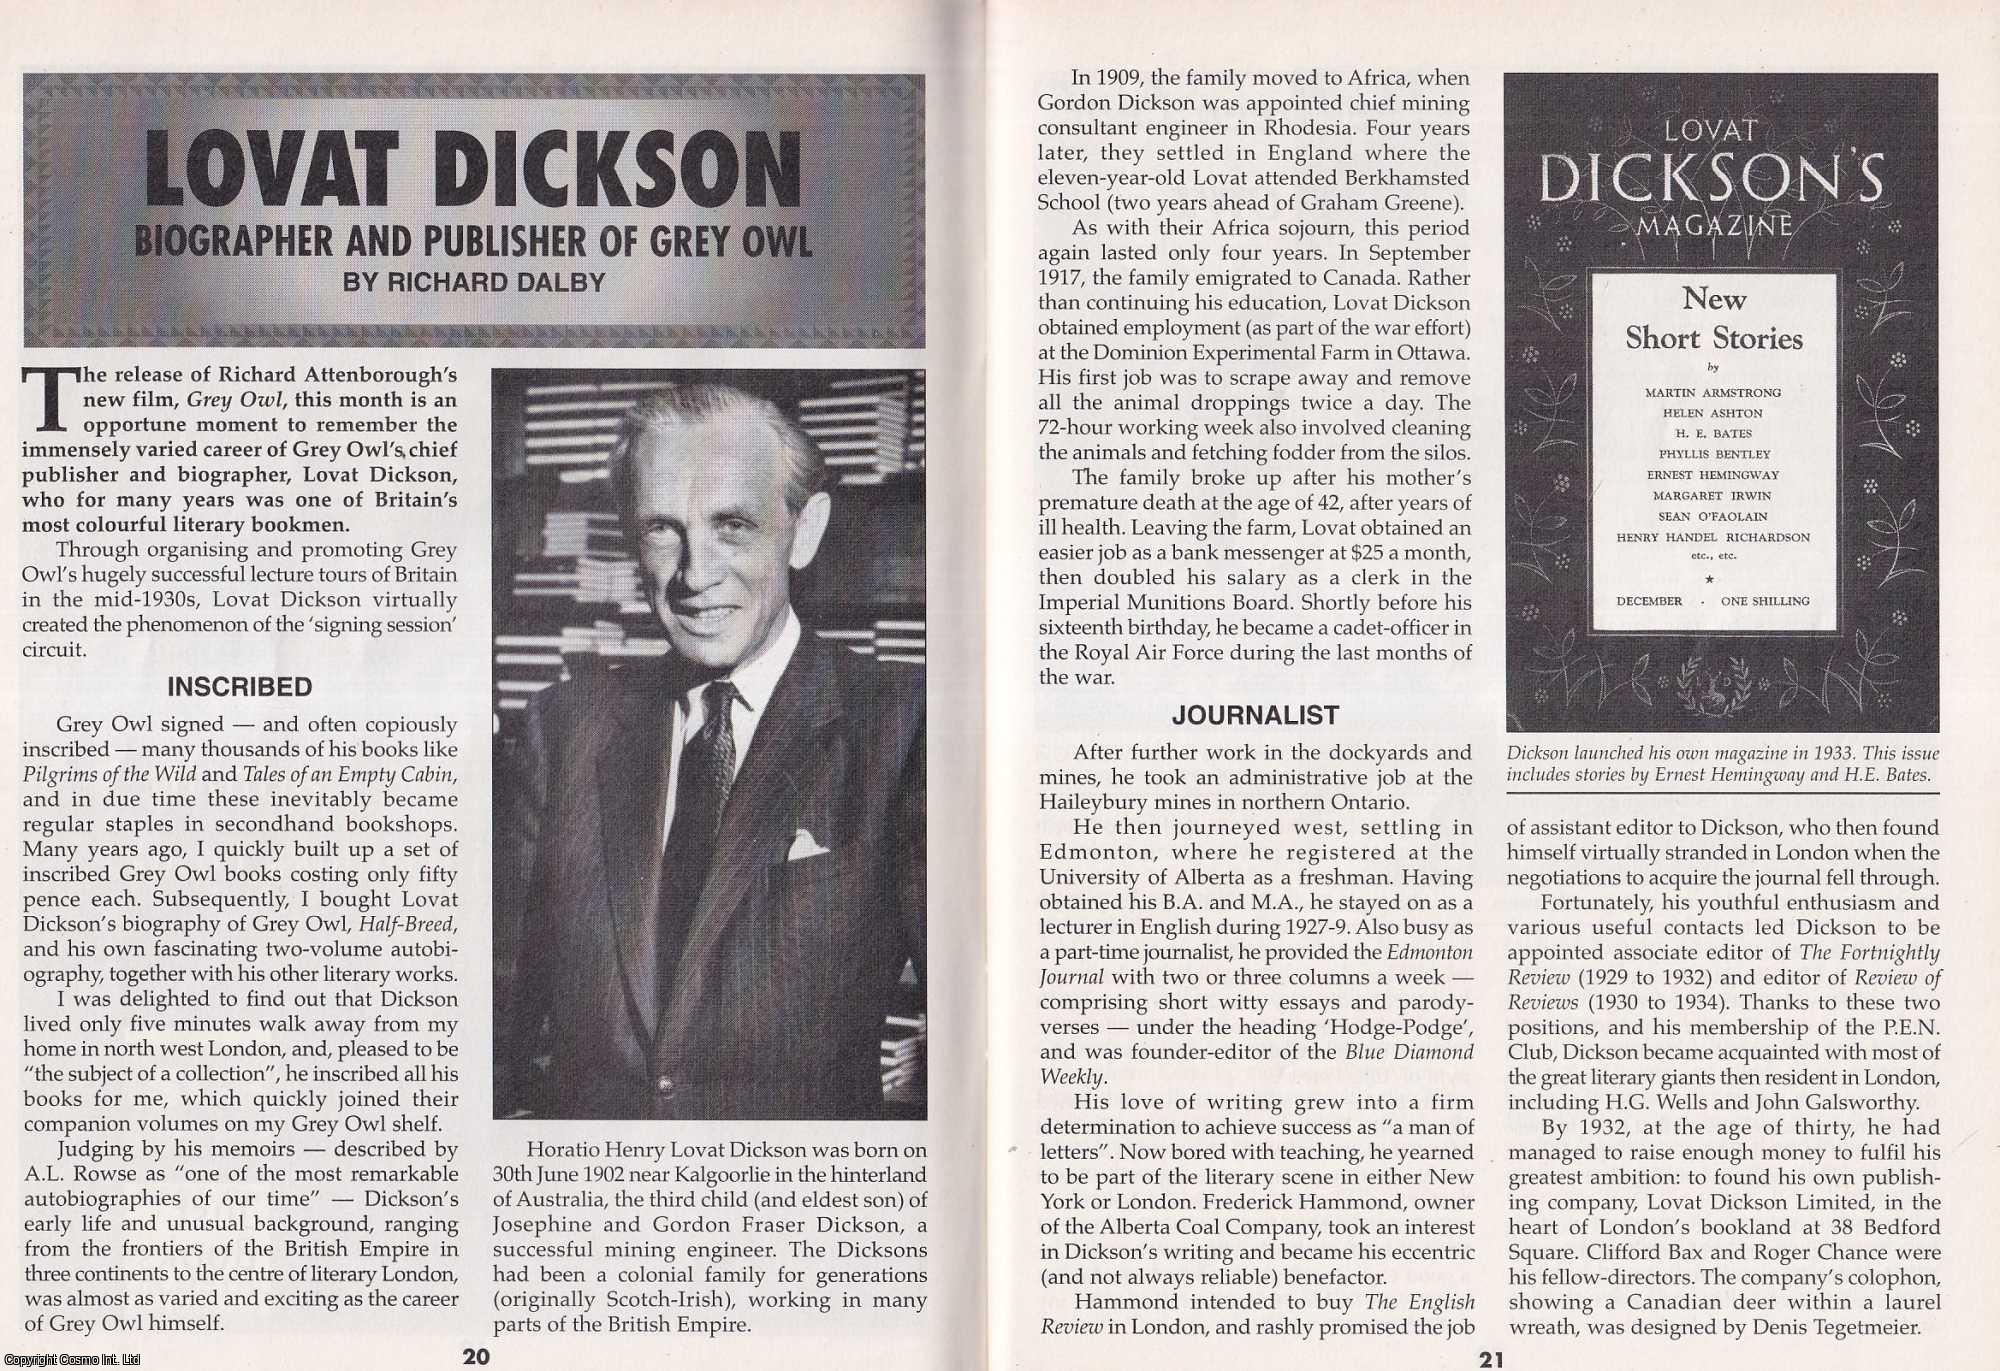 Richard Dalby - Lovat Dickson. Biographer and Publisher of Grey Owl. This is an original article separated from an issue of The Book & Magazine Collector publication.